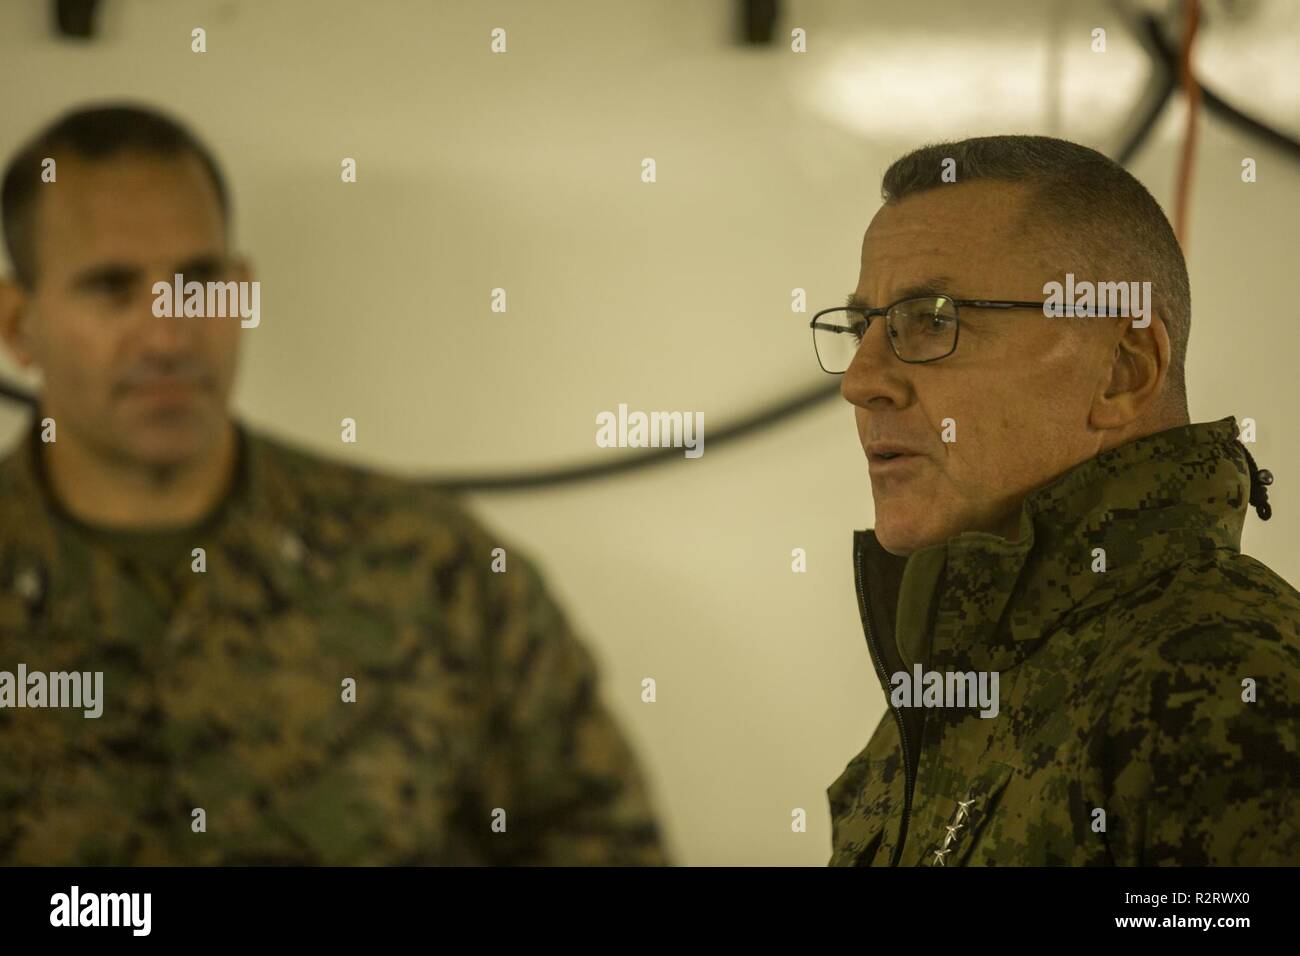 U.S. Marine Corps Lt. Gen. Robert F. Hedelund, the commanding general of II Marine Expeditionary Force speaks with Marines during Exercise Trident Juncture 18 at Vaernes Air Station, Norway, Nov. 7, 2018. Trident Juncture 18 enhances the U.S. and NATO Allies’ and partners’ abilities to work together collectively to conduct military operations under challenging conditions. Stock Photo